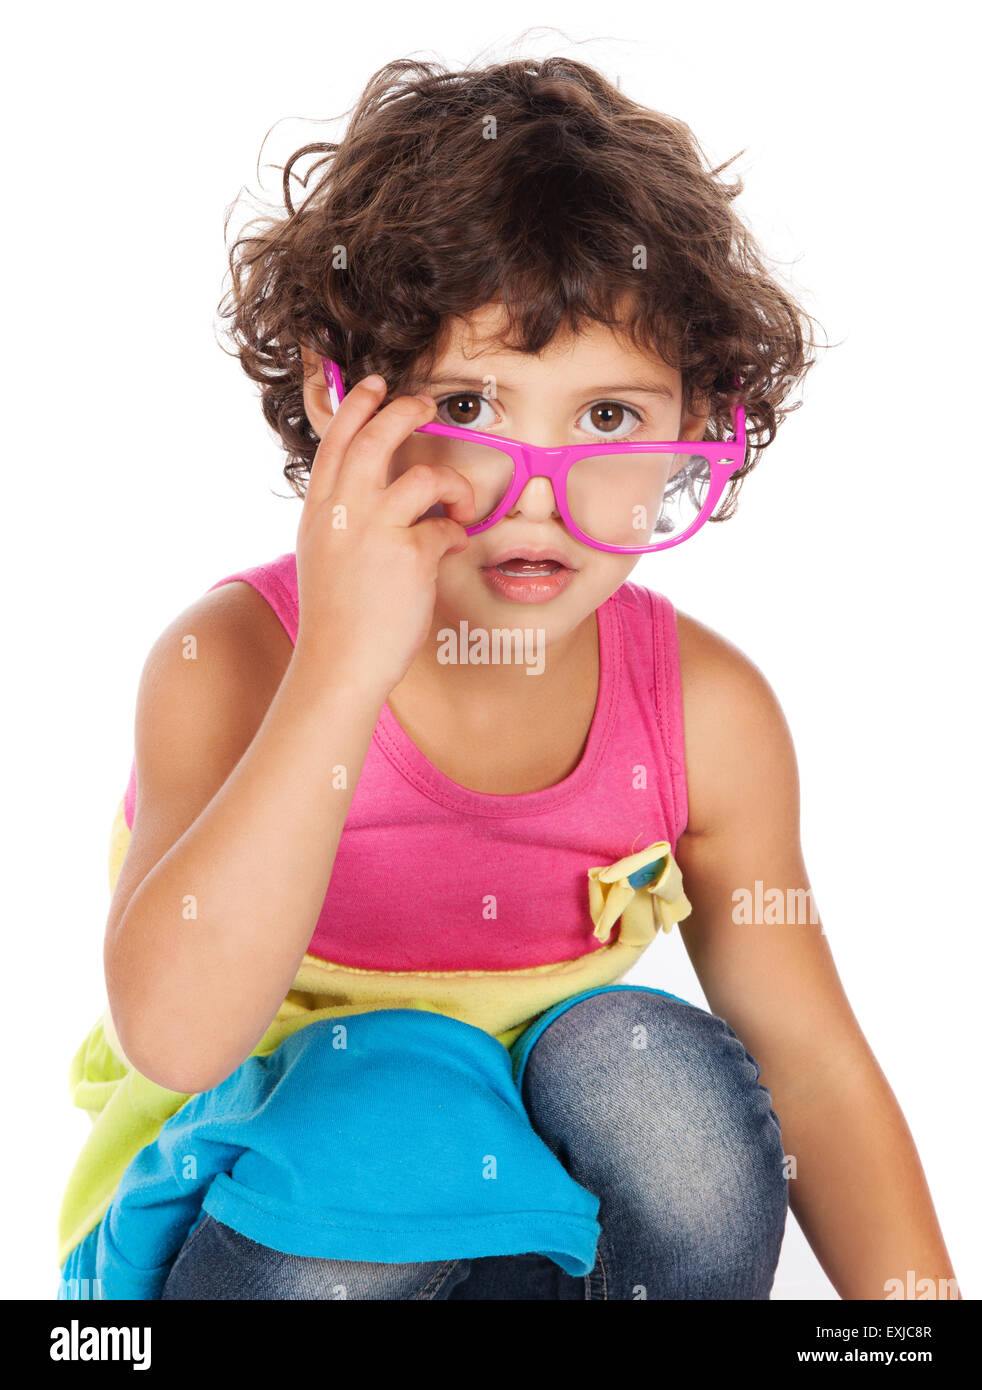 Adorable small caucasian child with curly hair wearing a pink blue and yellow dress. The girl is playing with funky sunglasses. Stock Photo